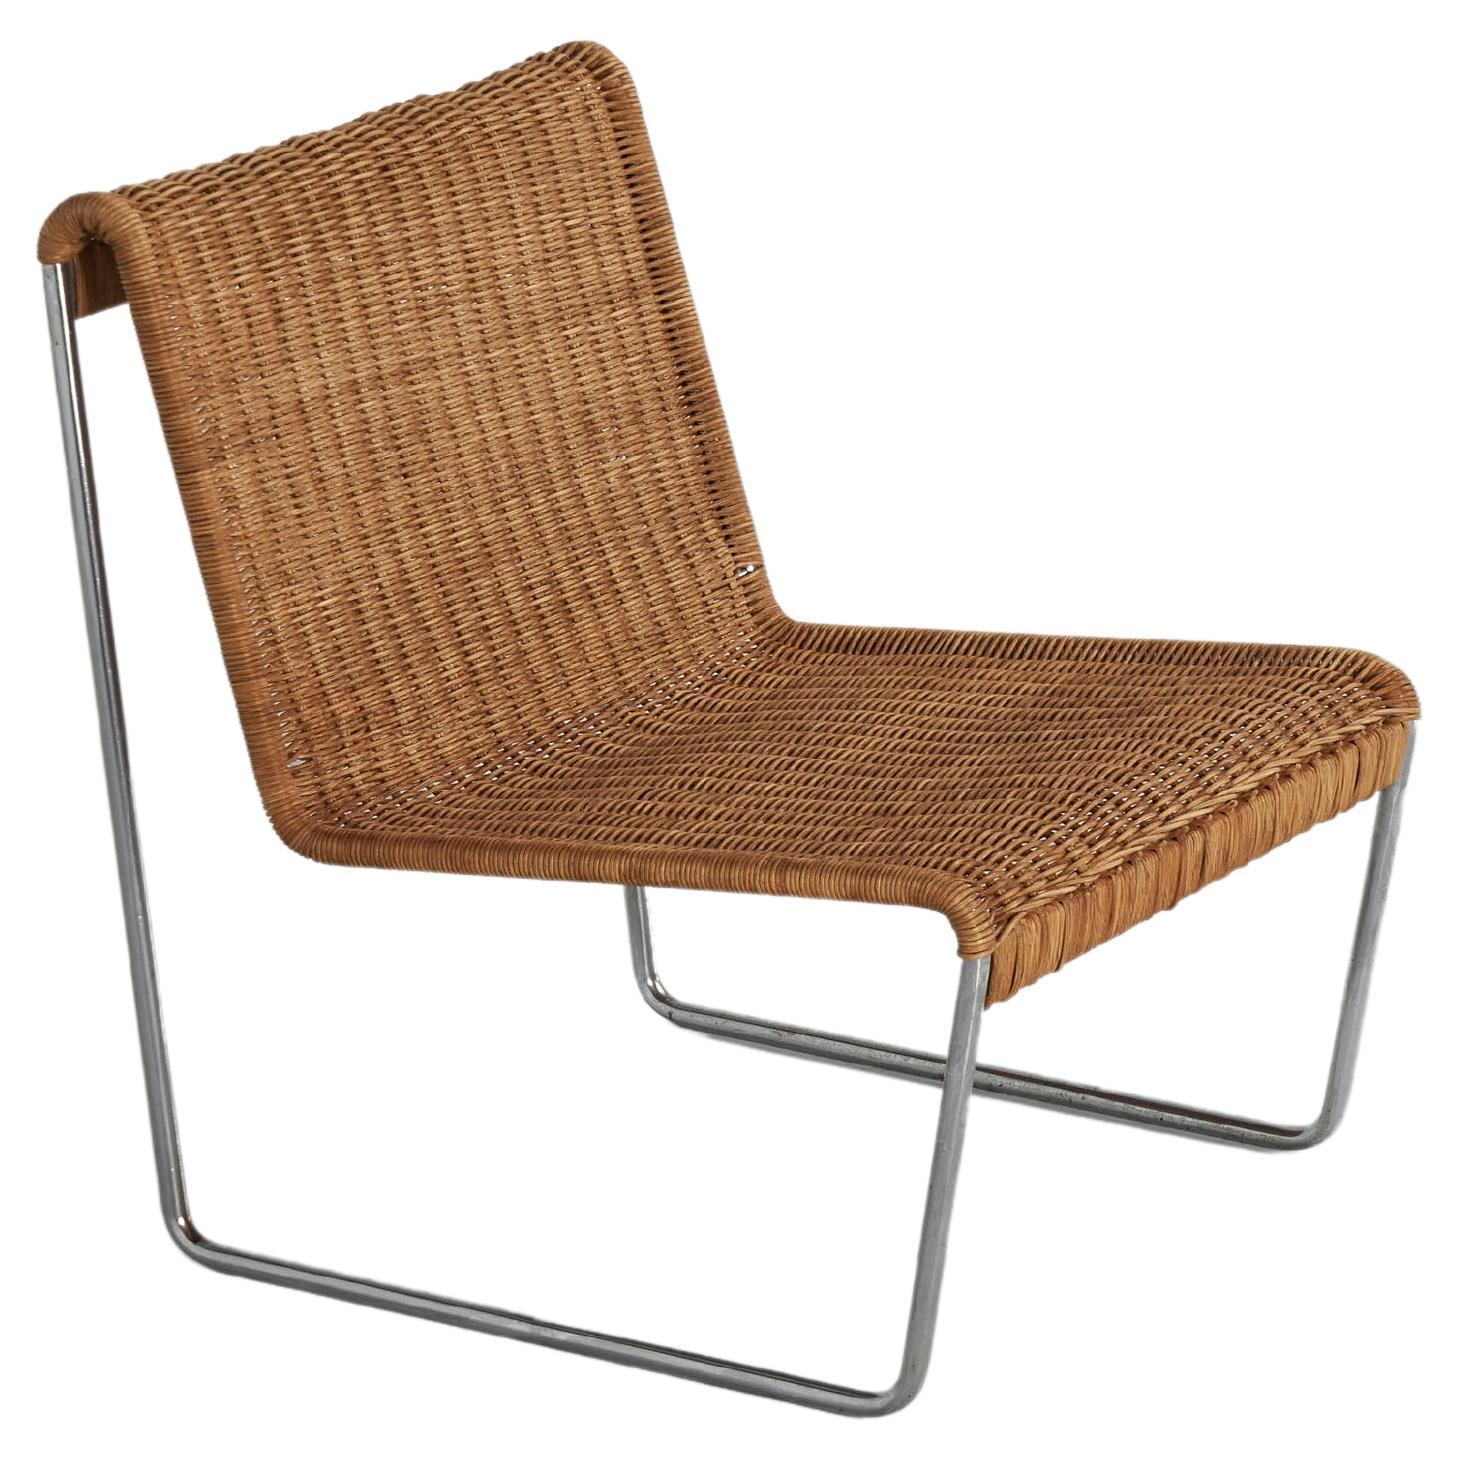 Tubular modernist lounge chair Germany 1960s For Sale